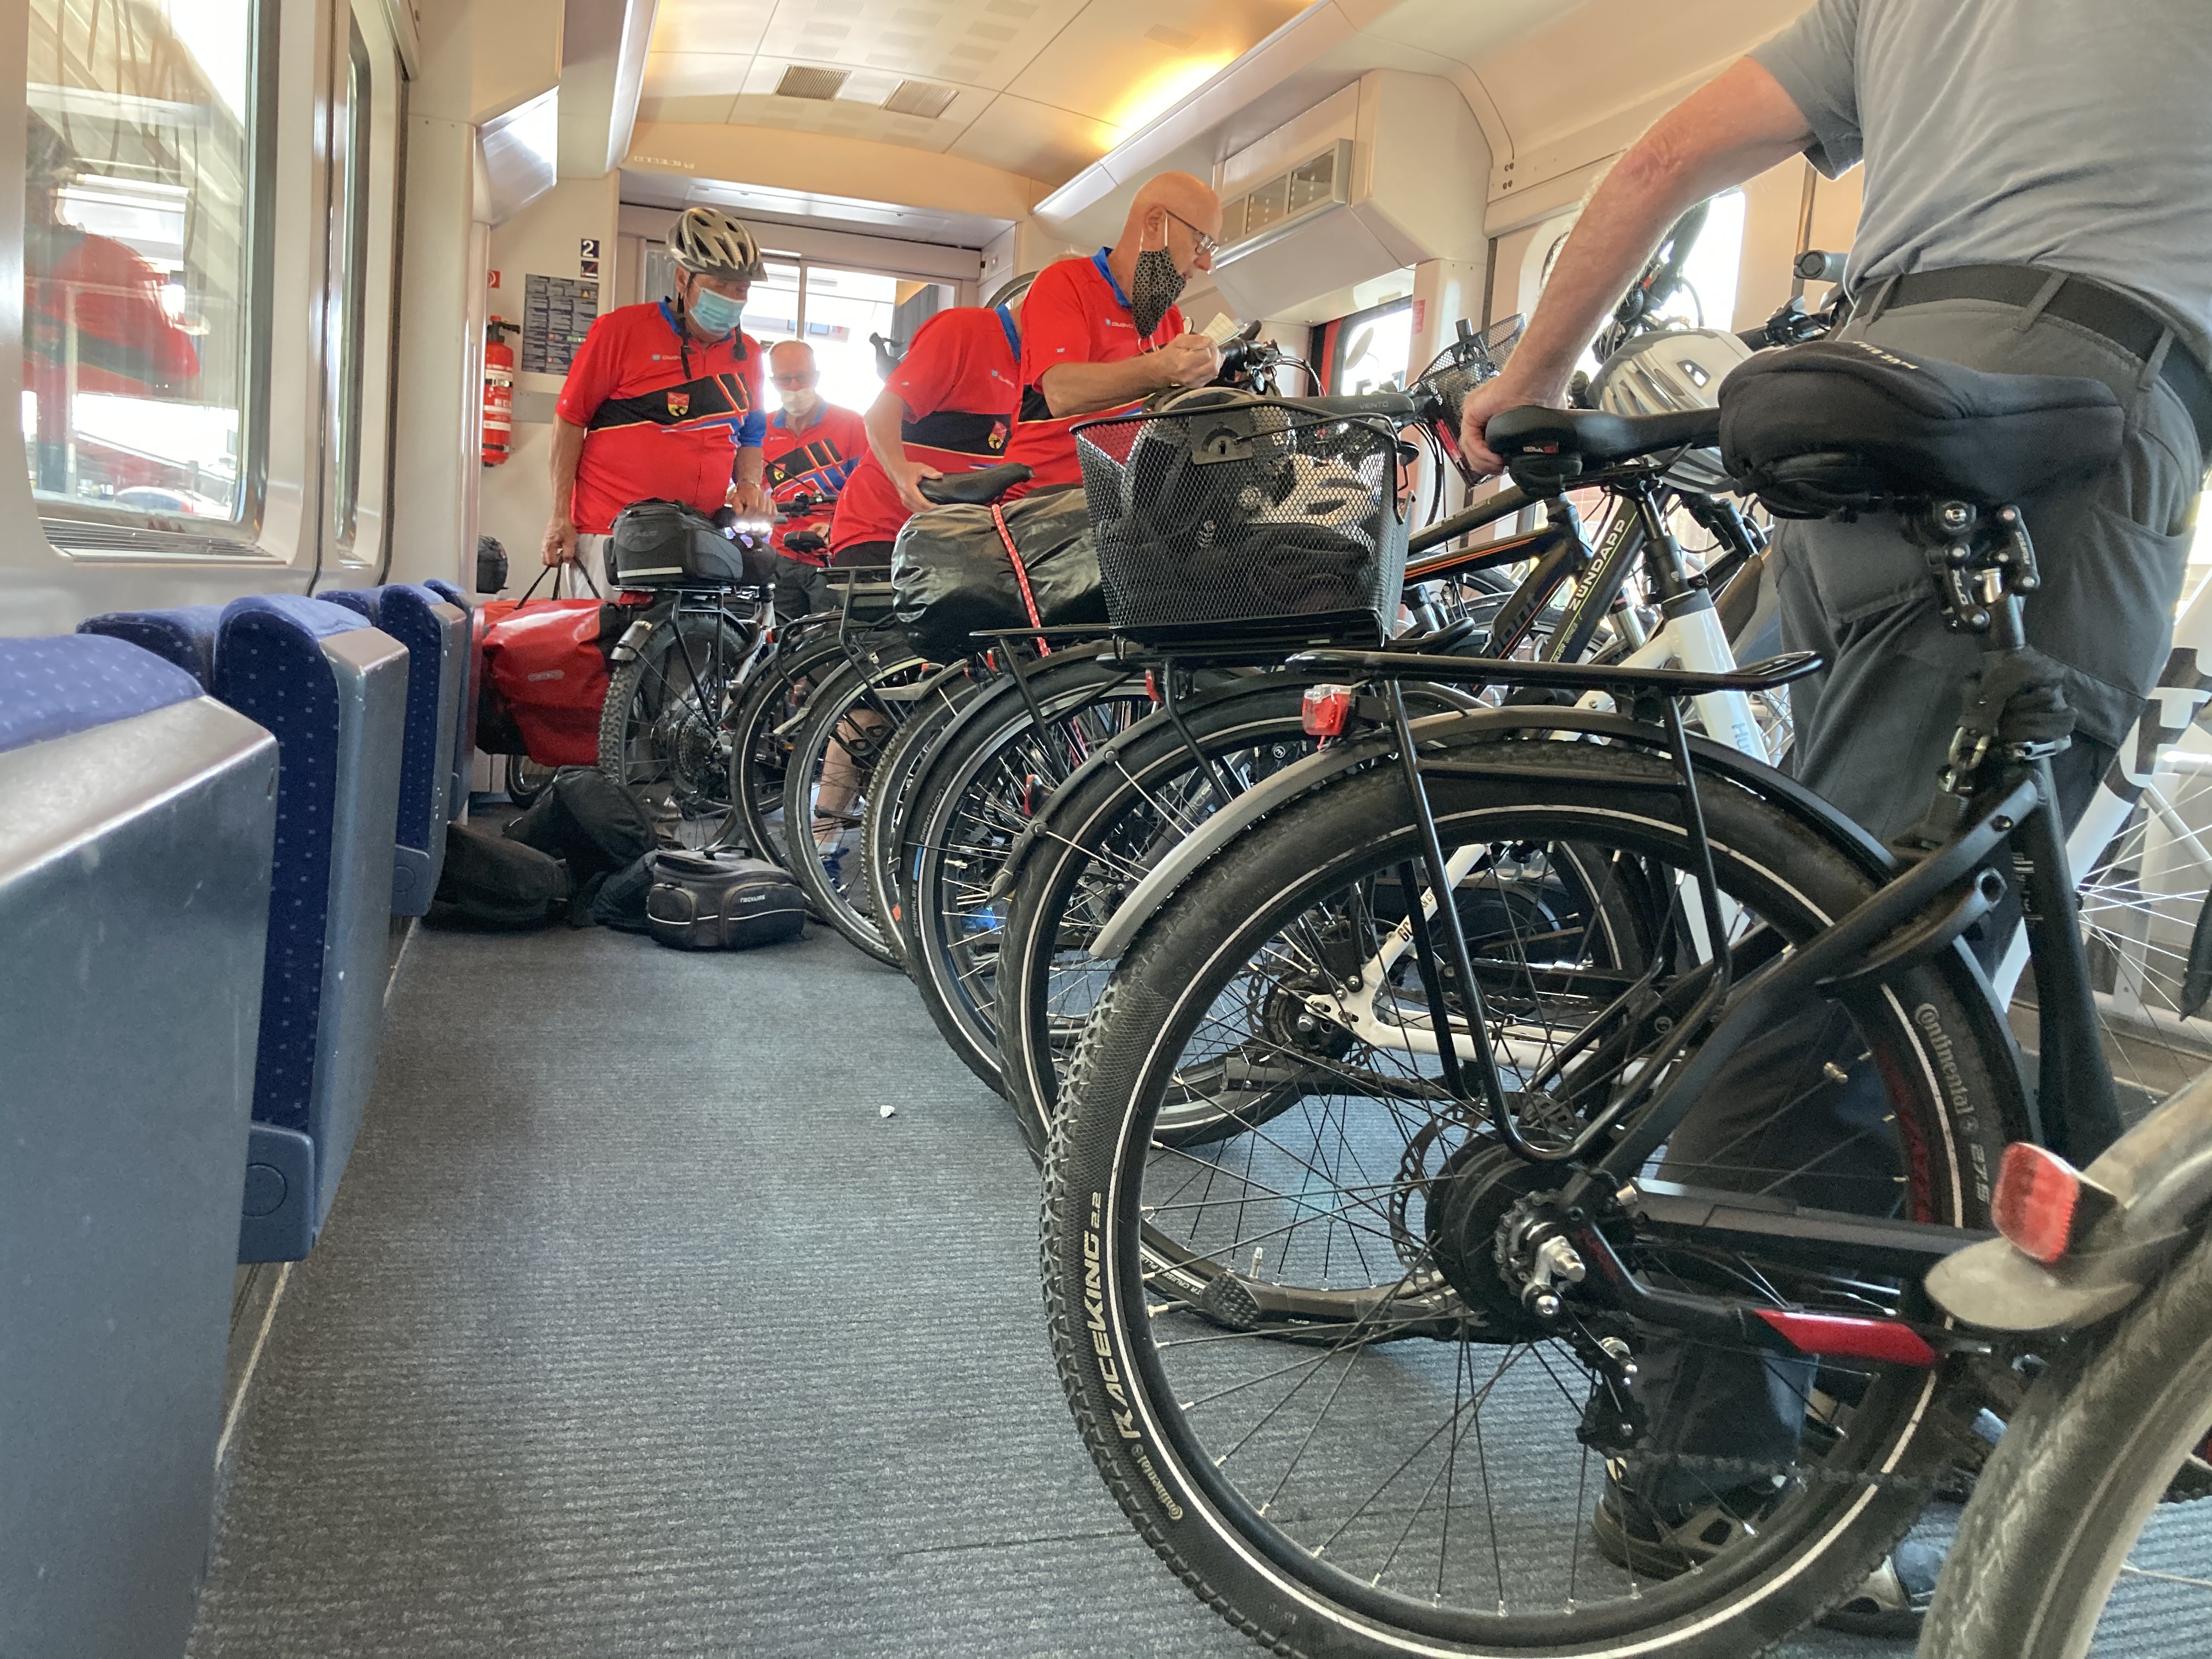 Confused German retirees boarding a train with ebikes